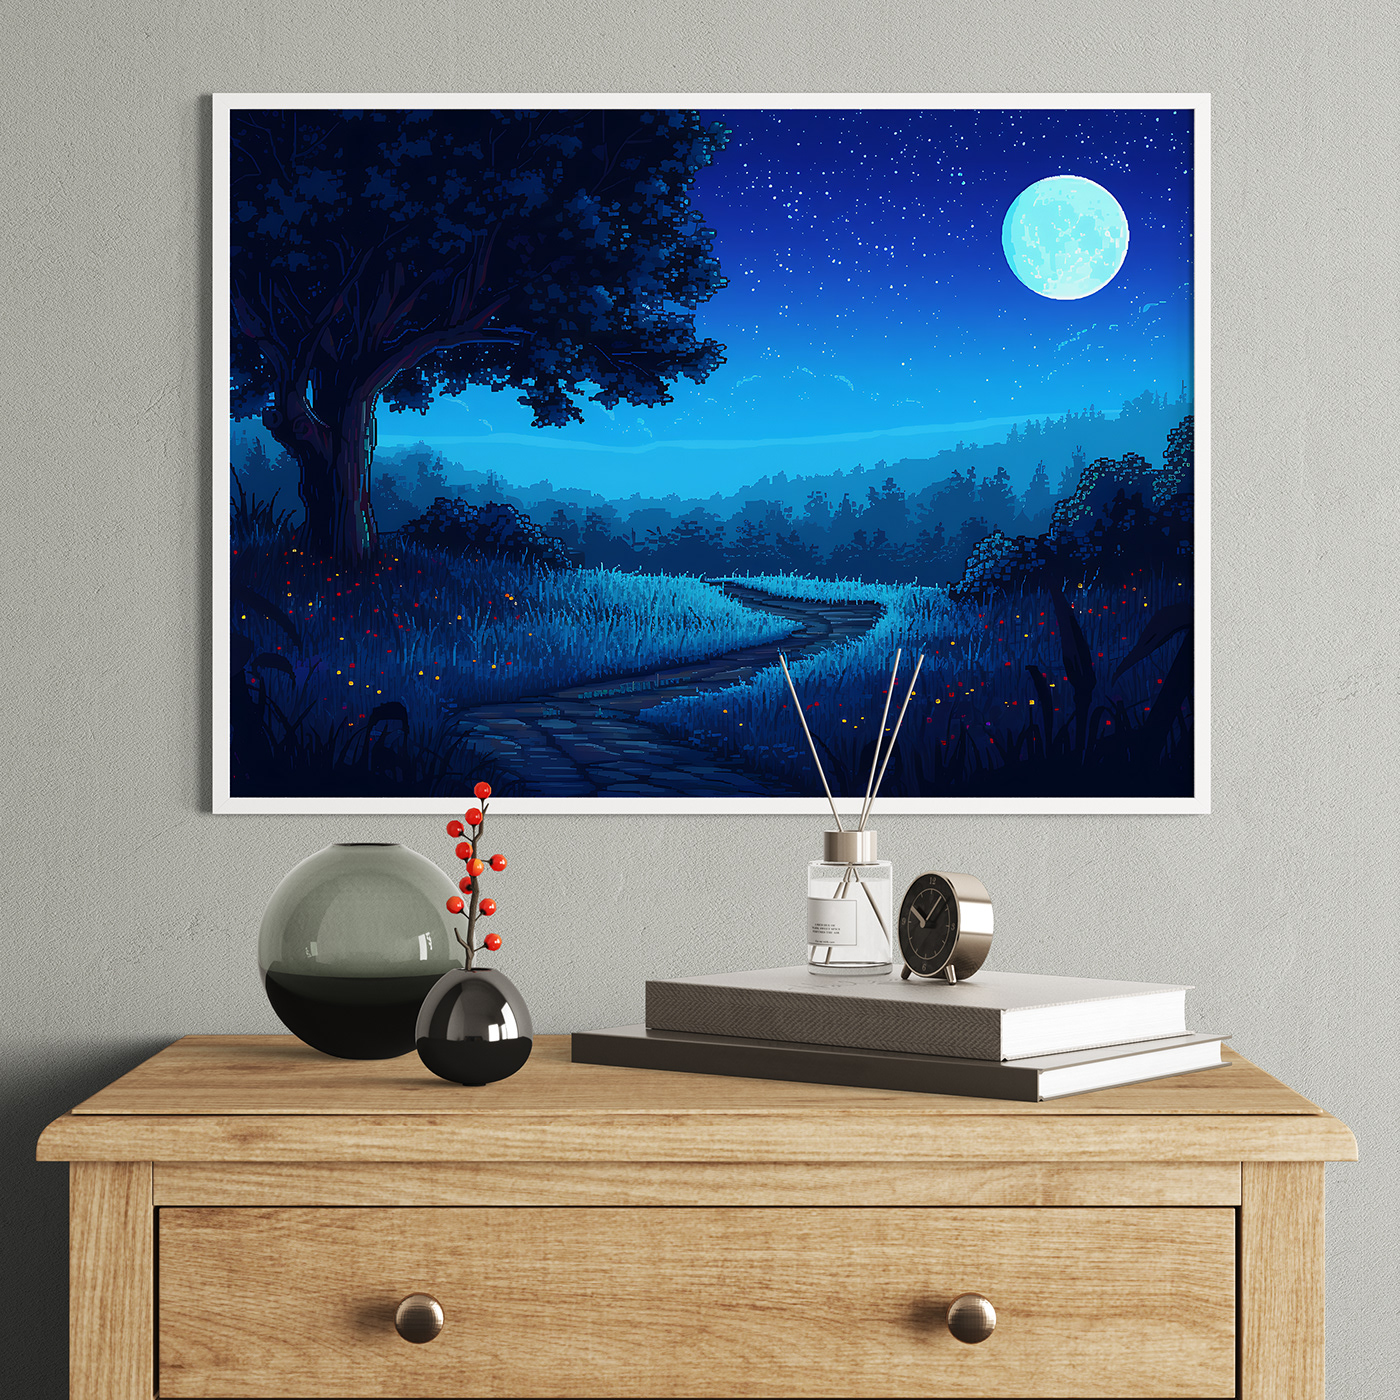 Starlight Stream Sanctuary background Picture Frame-Wall Photo Frame for Home Decor